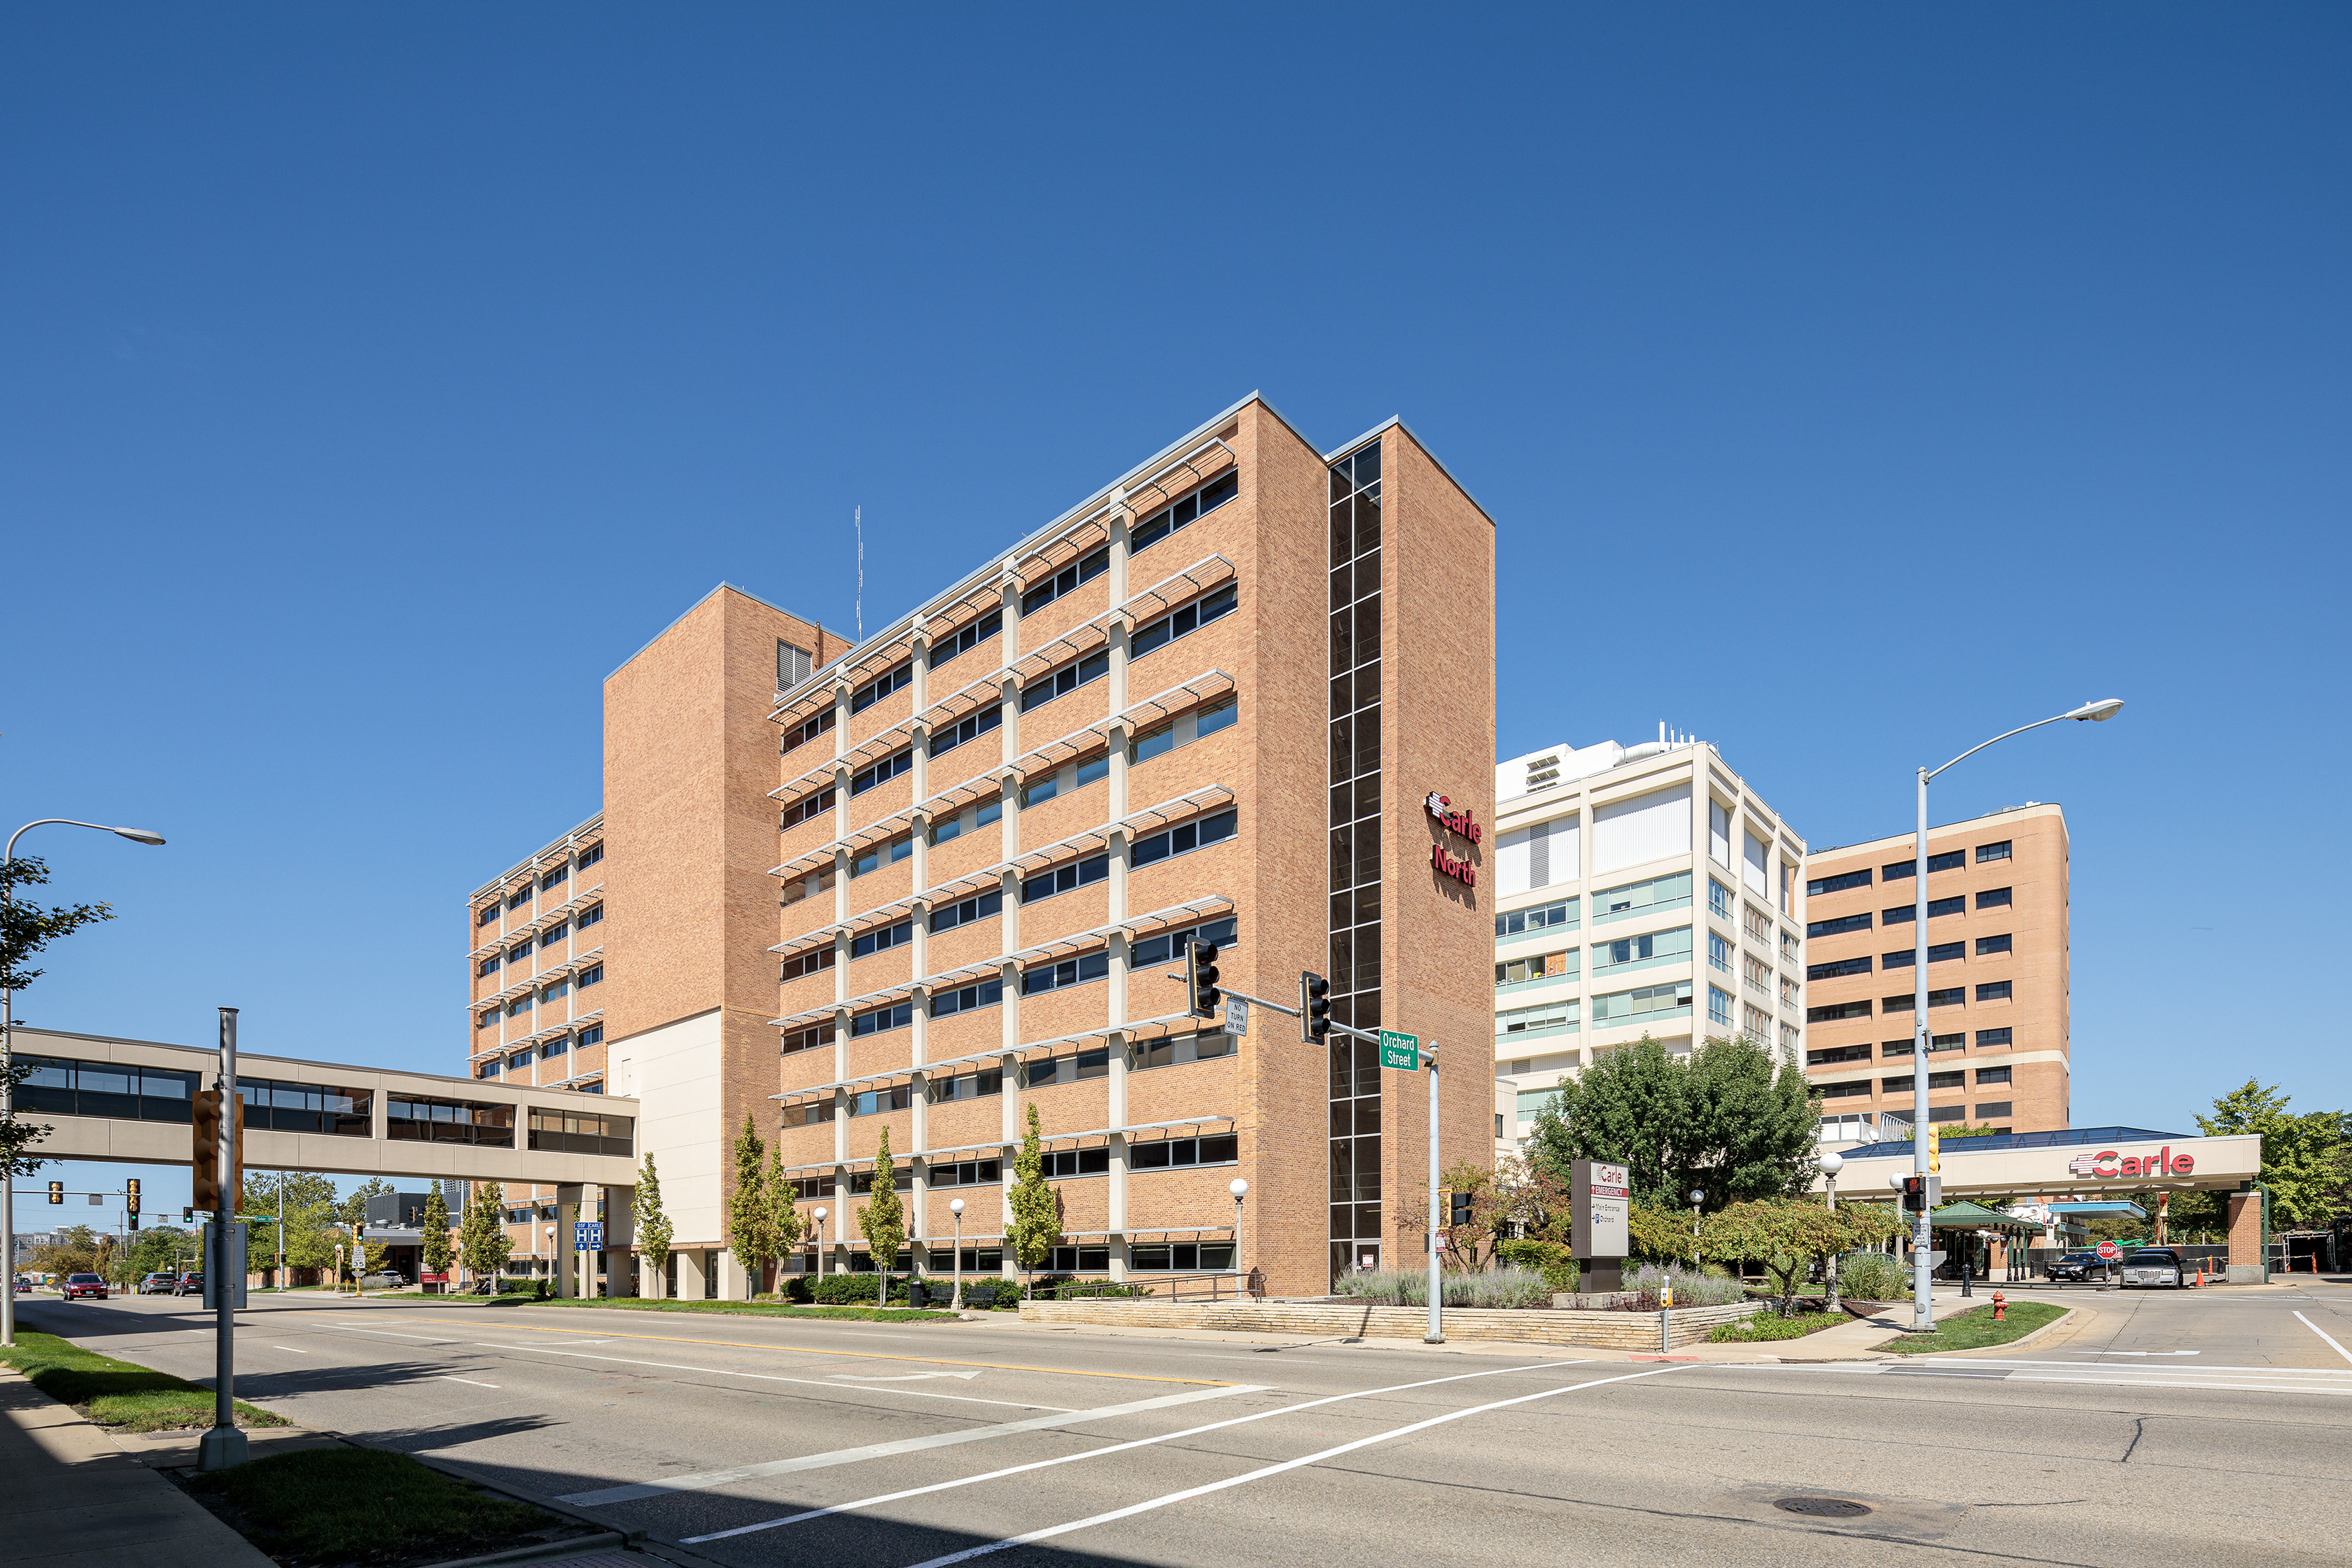 Care, commitment, quality at Carle Foundation Hospital recognized by Healthgrades